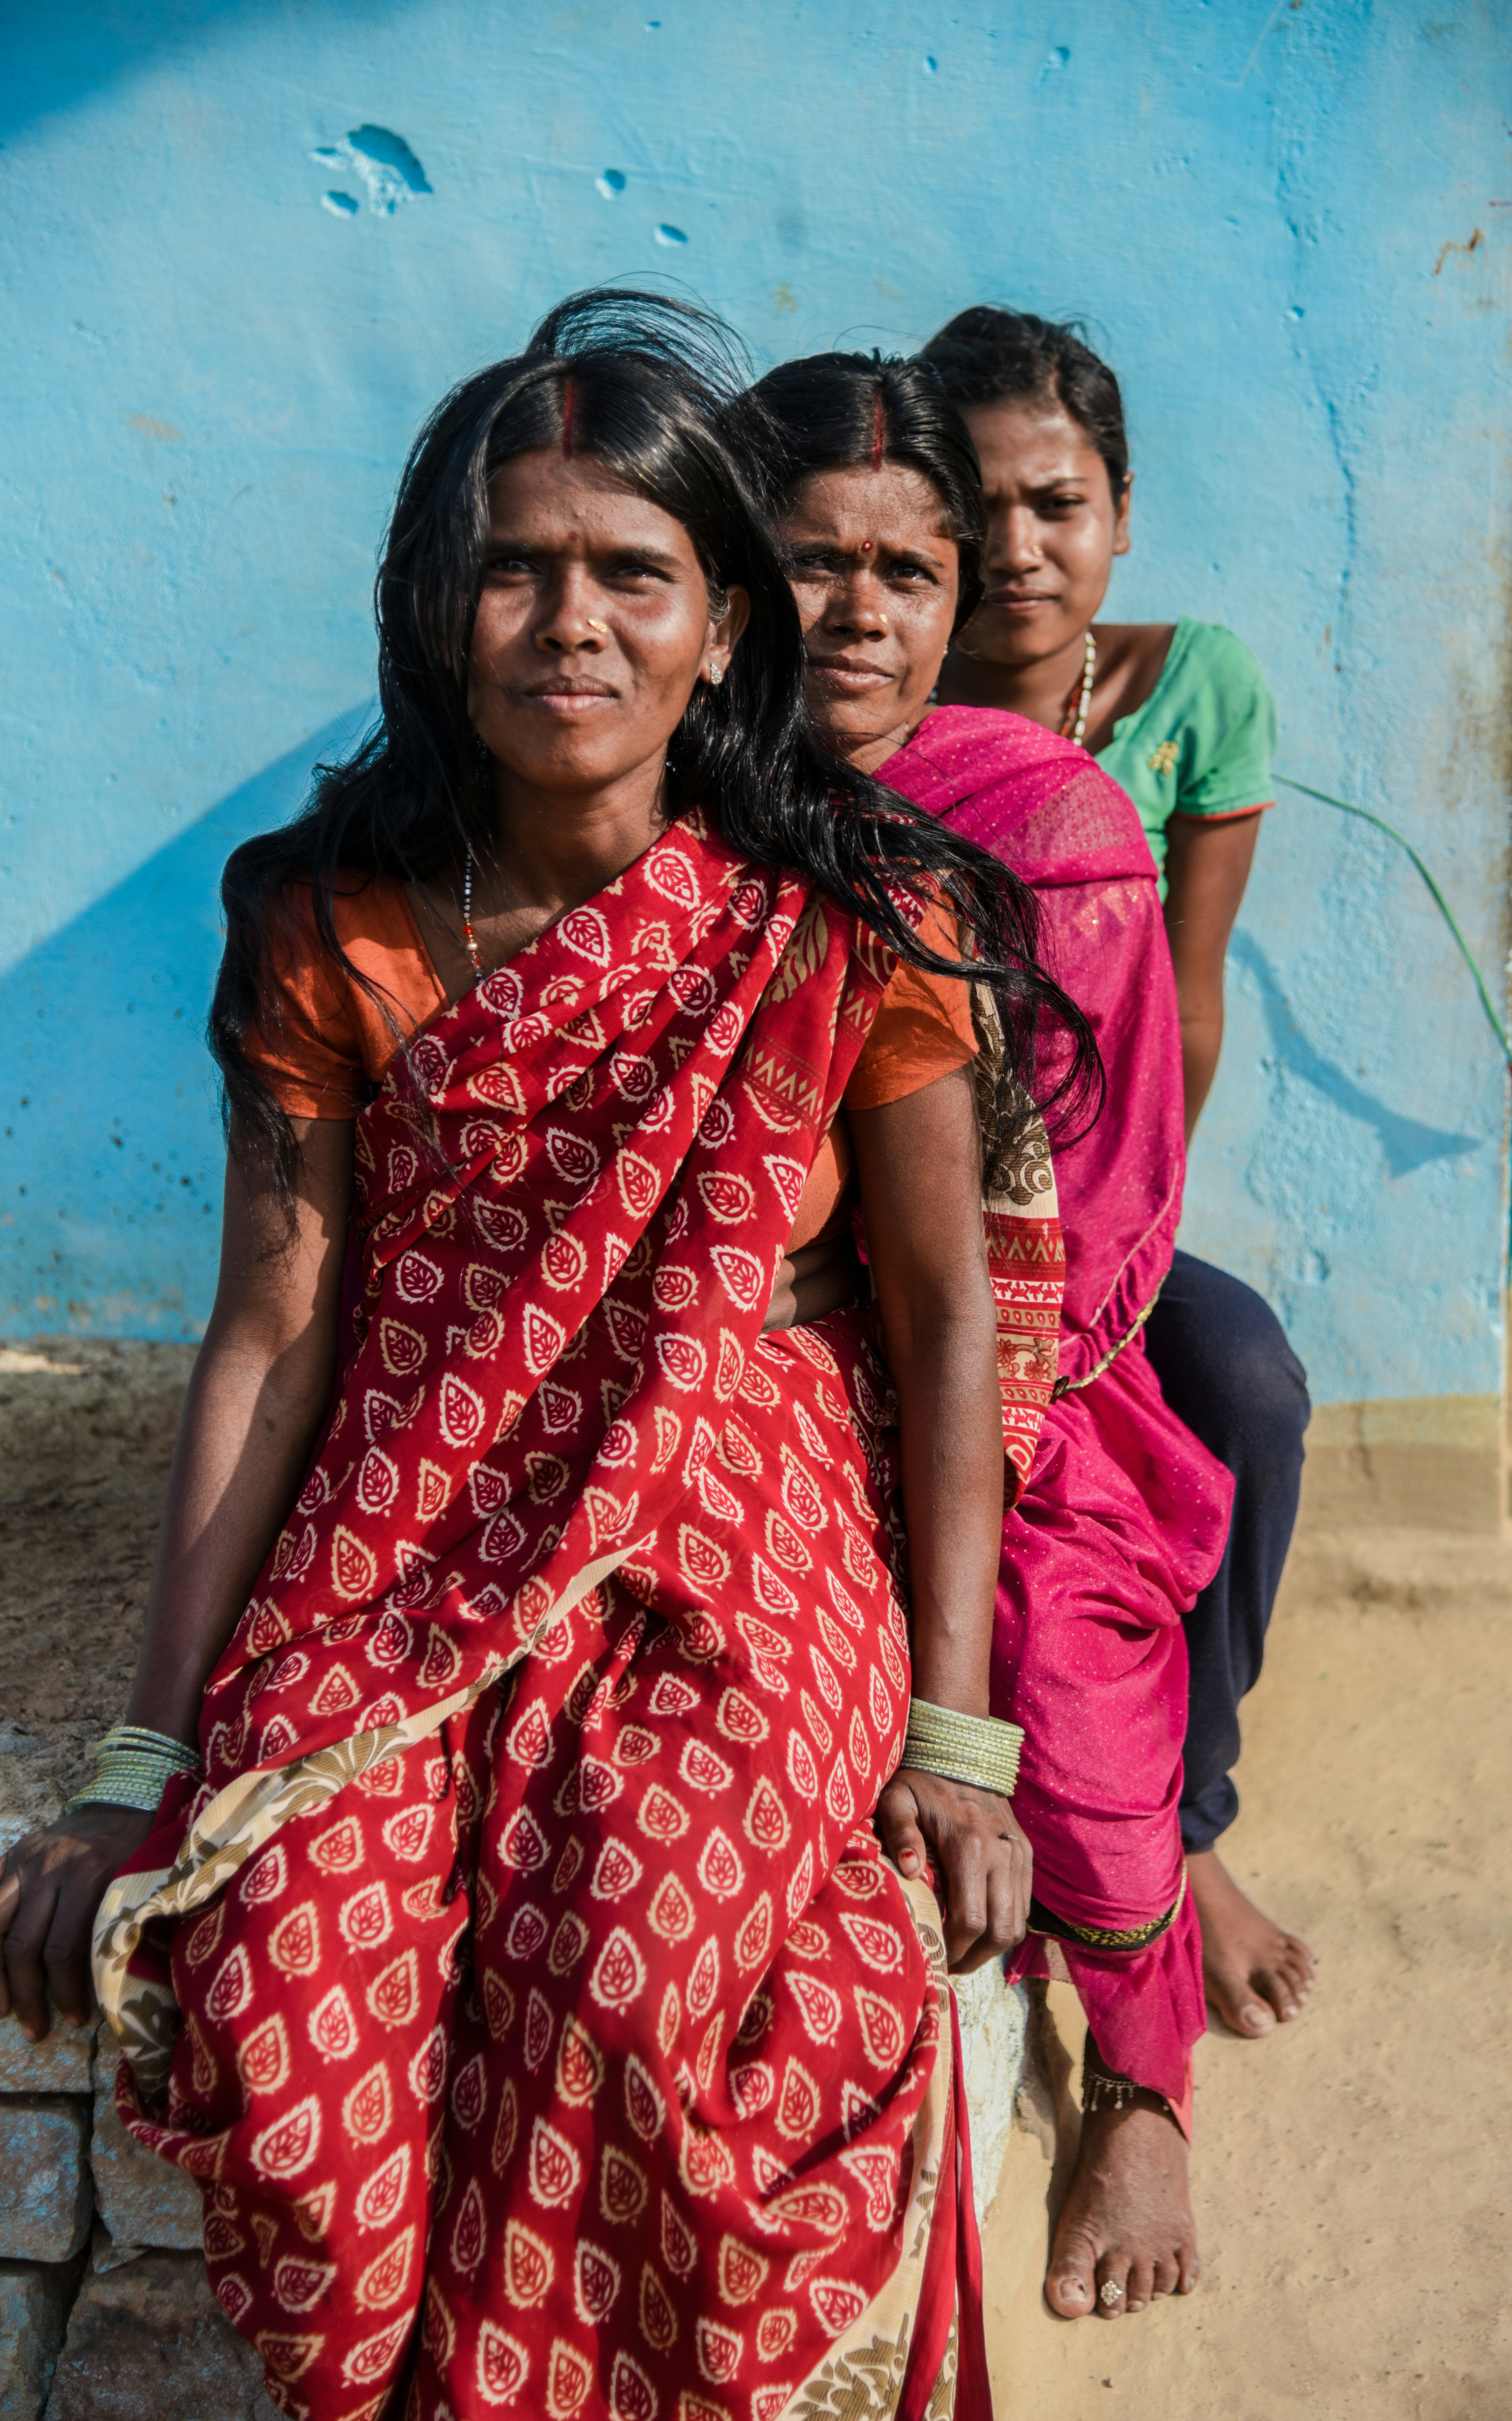 1000+ Indian Women Pictures Download Free Images on Unsplash